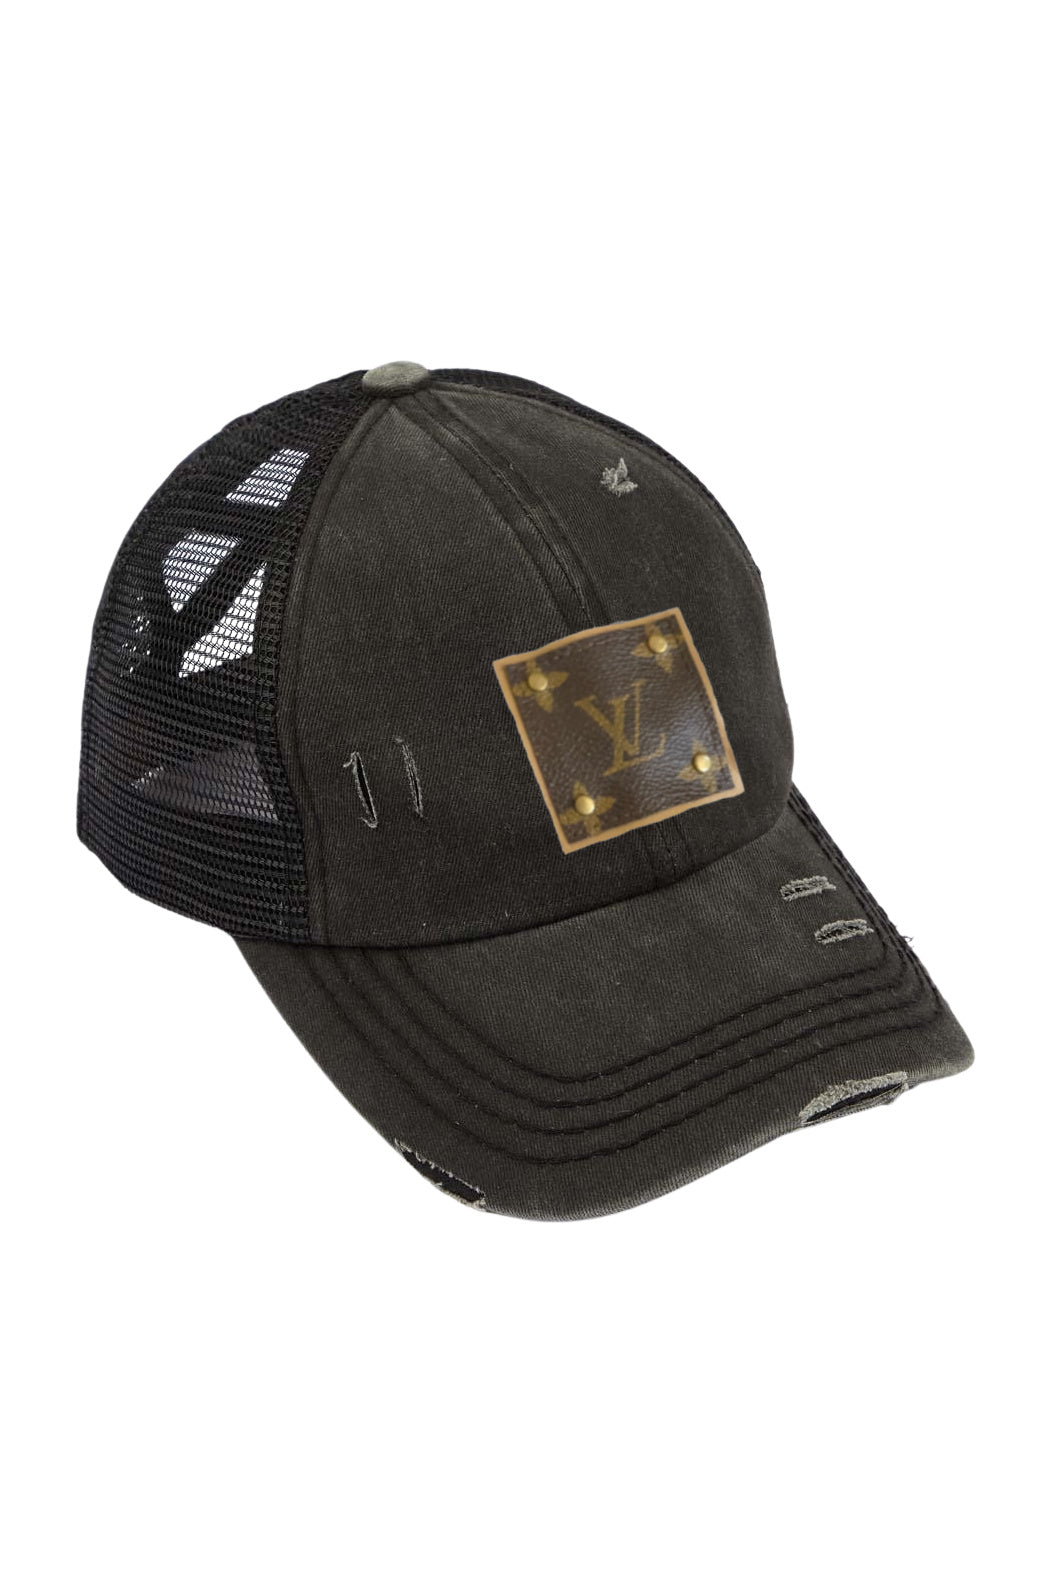 Upcycled Distressed Trucker Cap